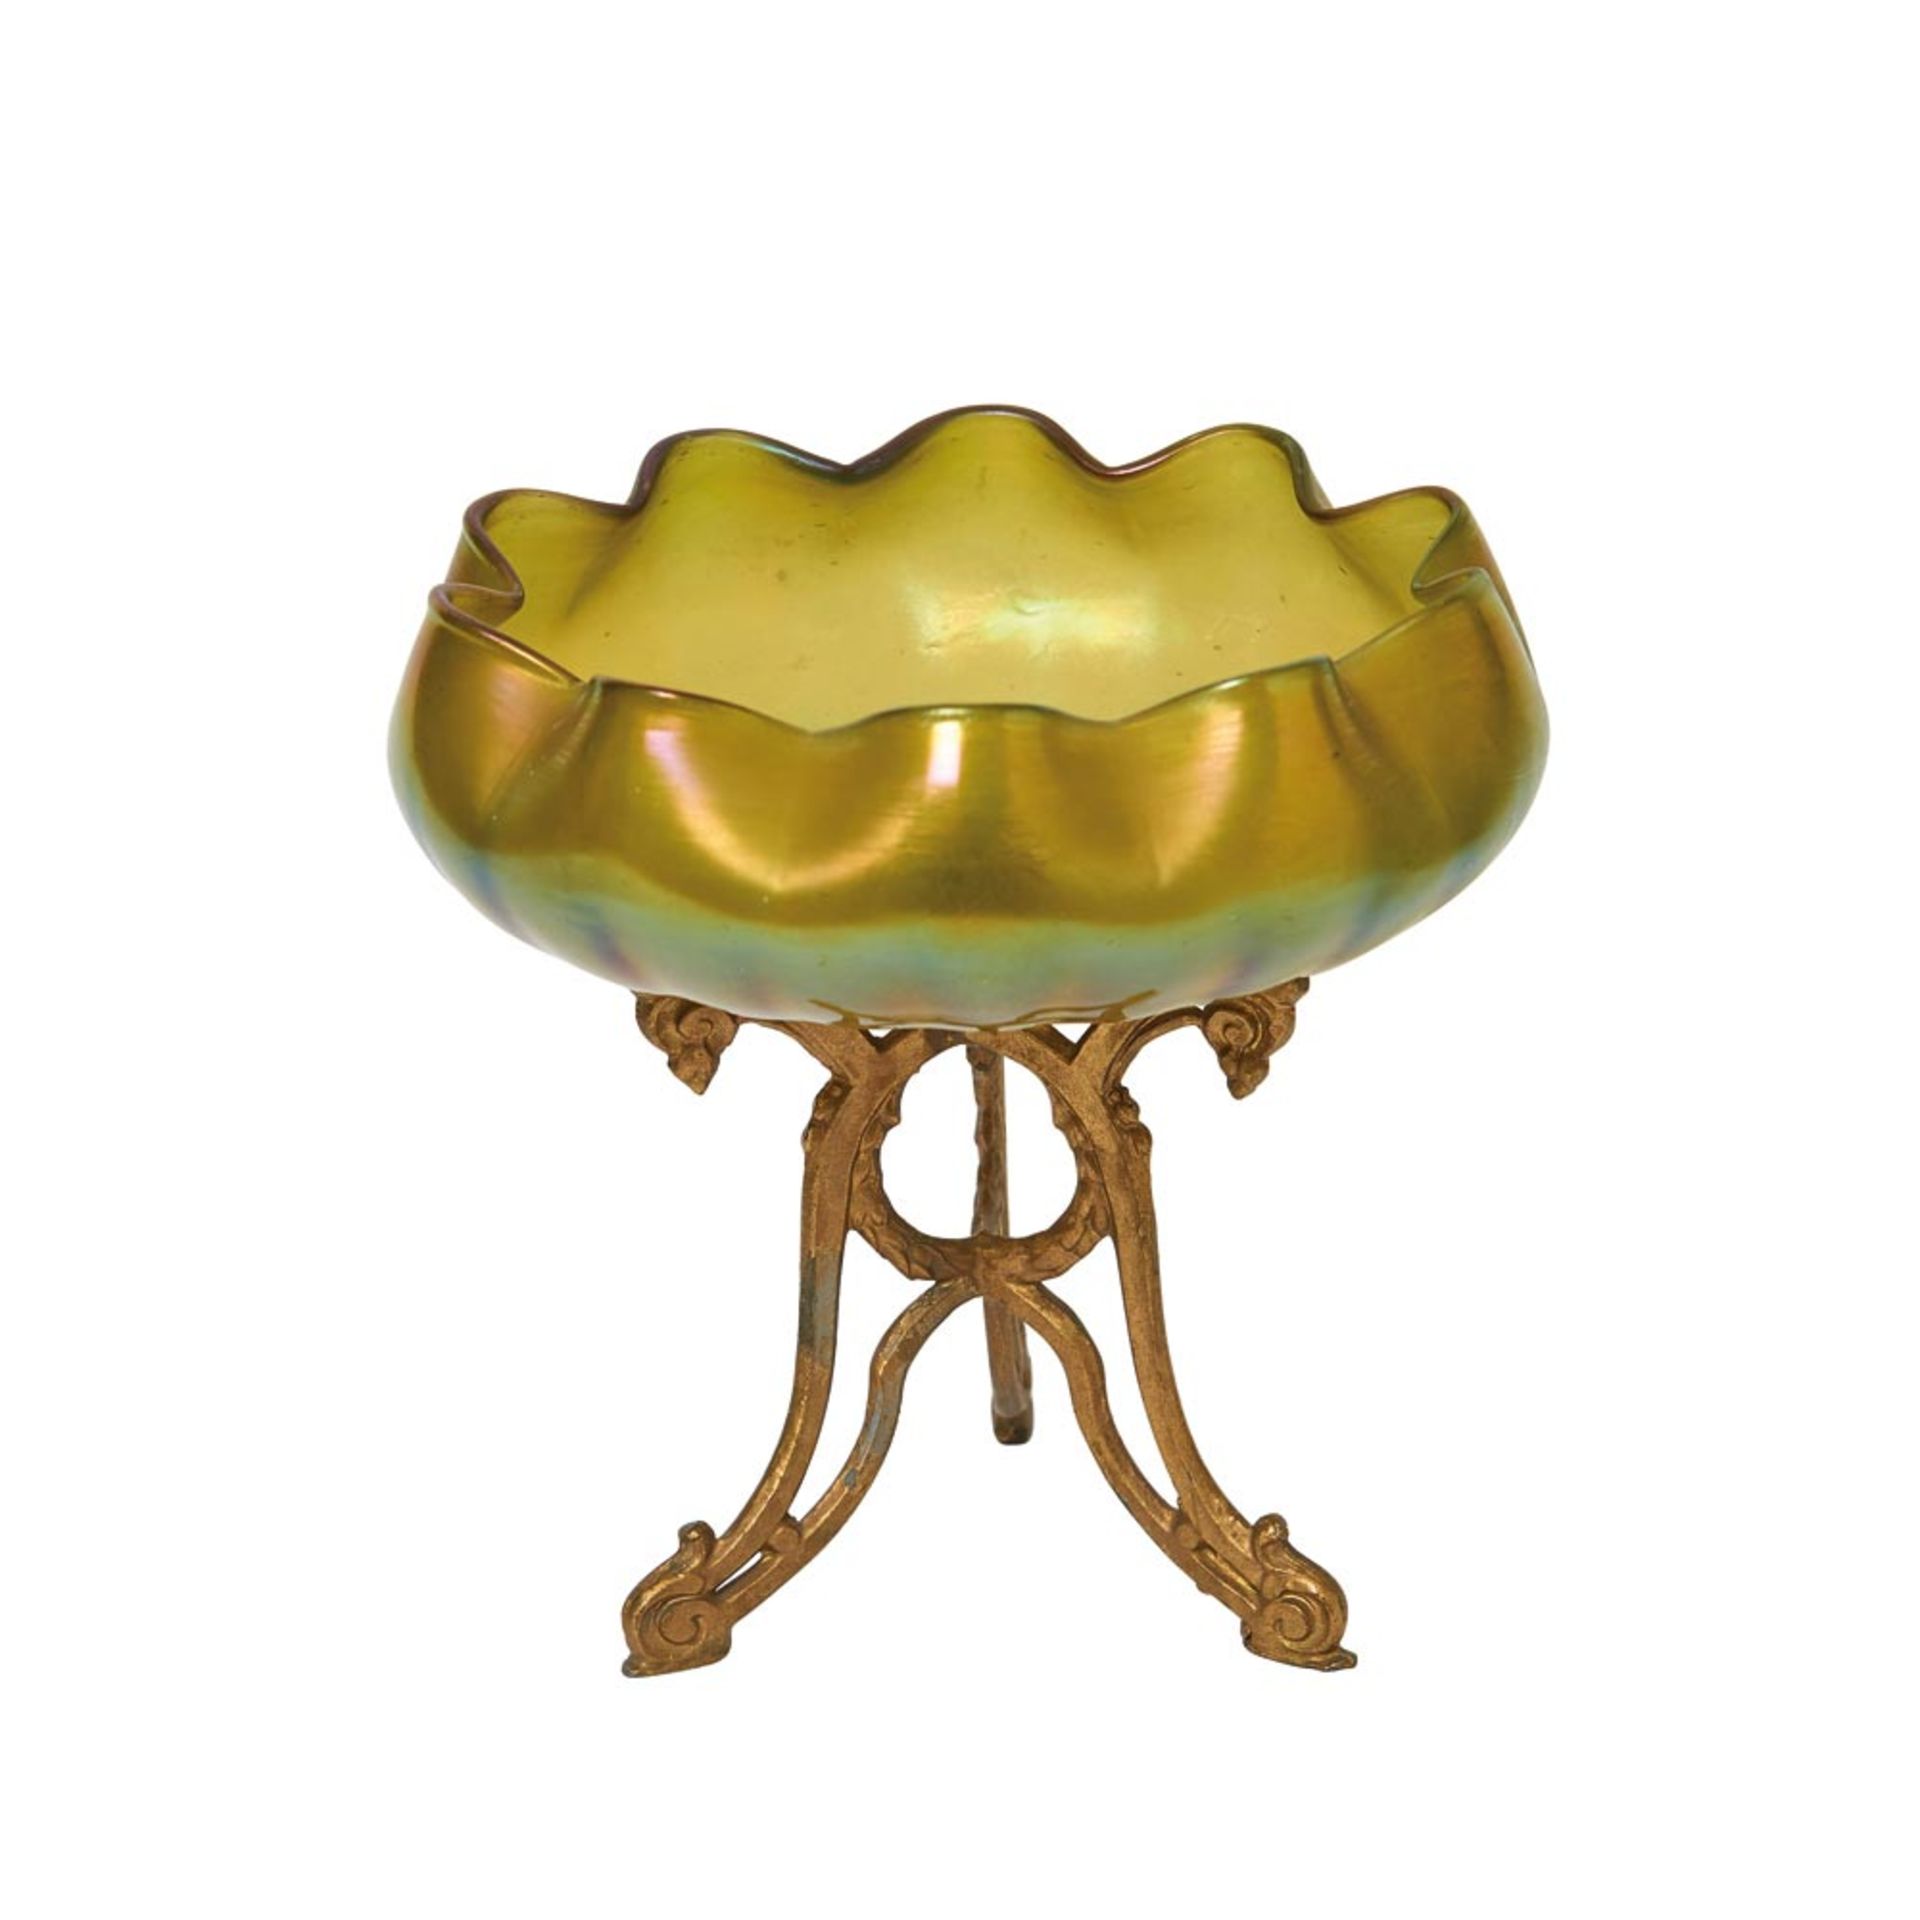 Glass Loetz style centrepiece, early 20th century